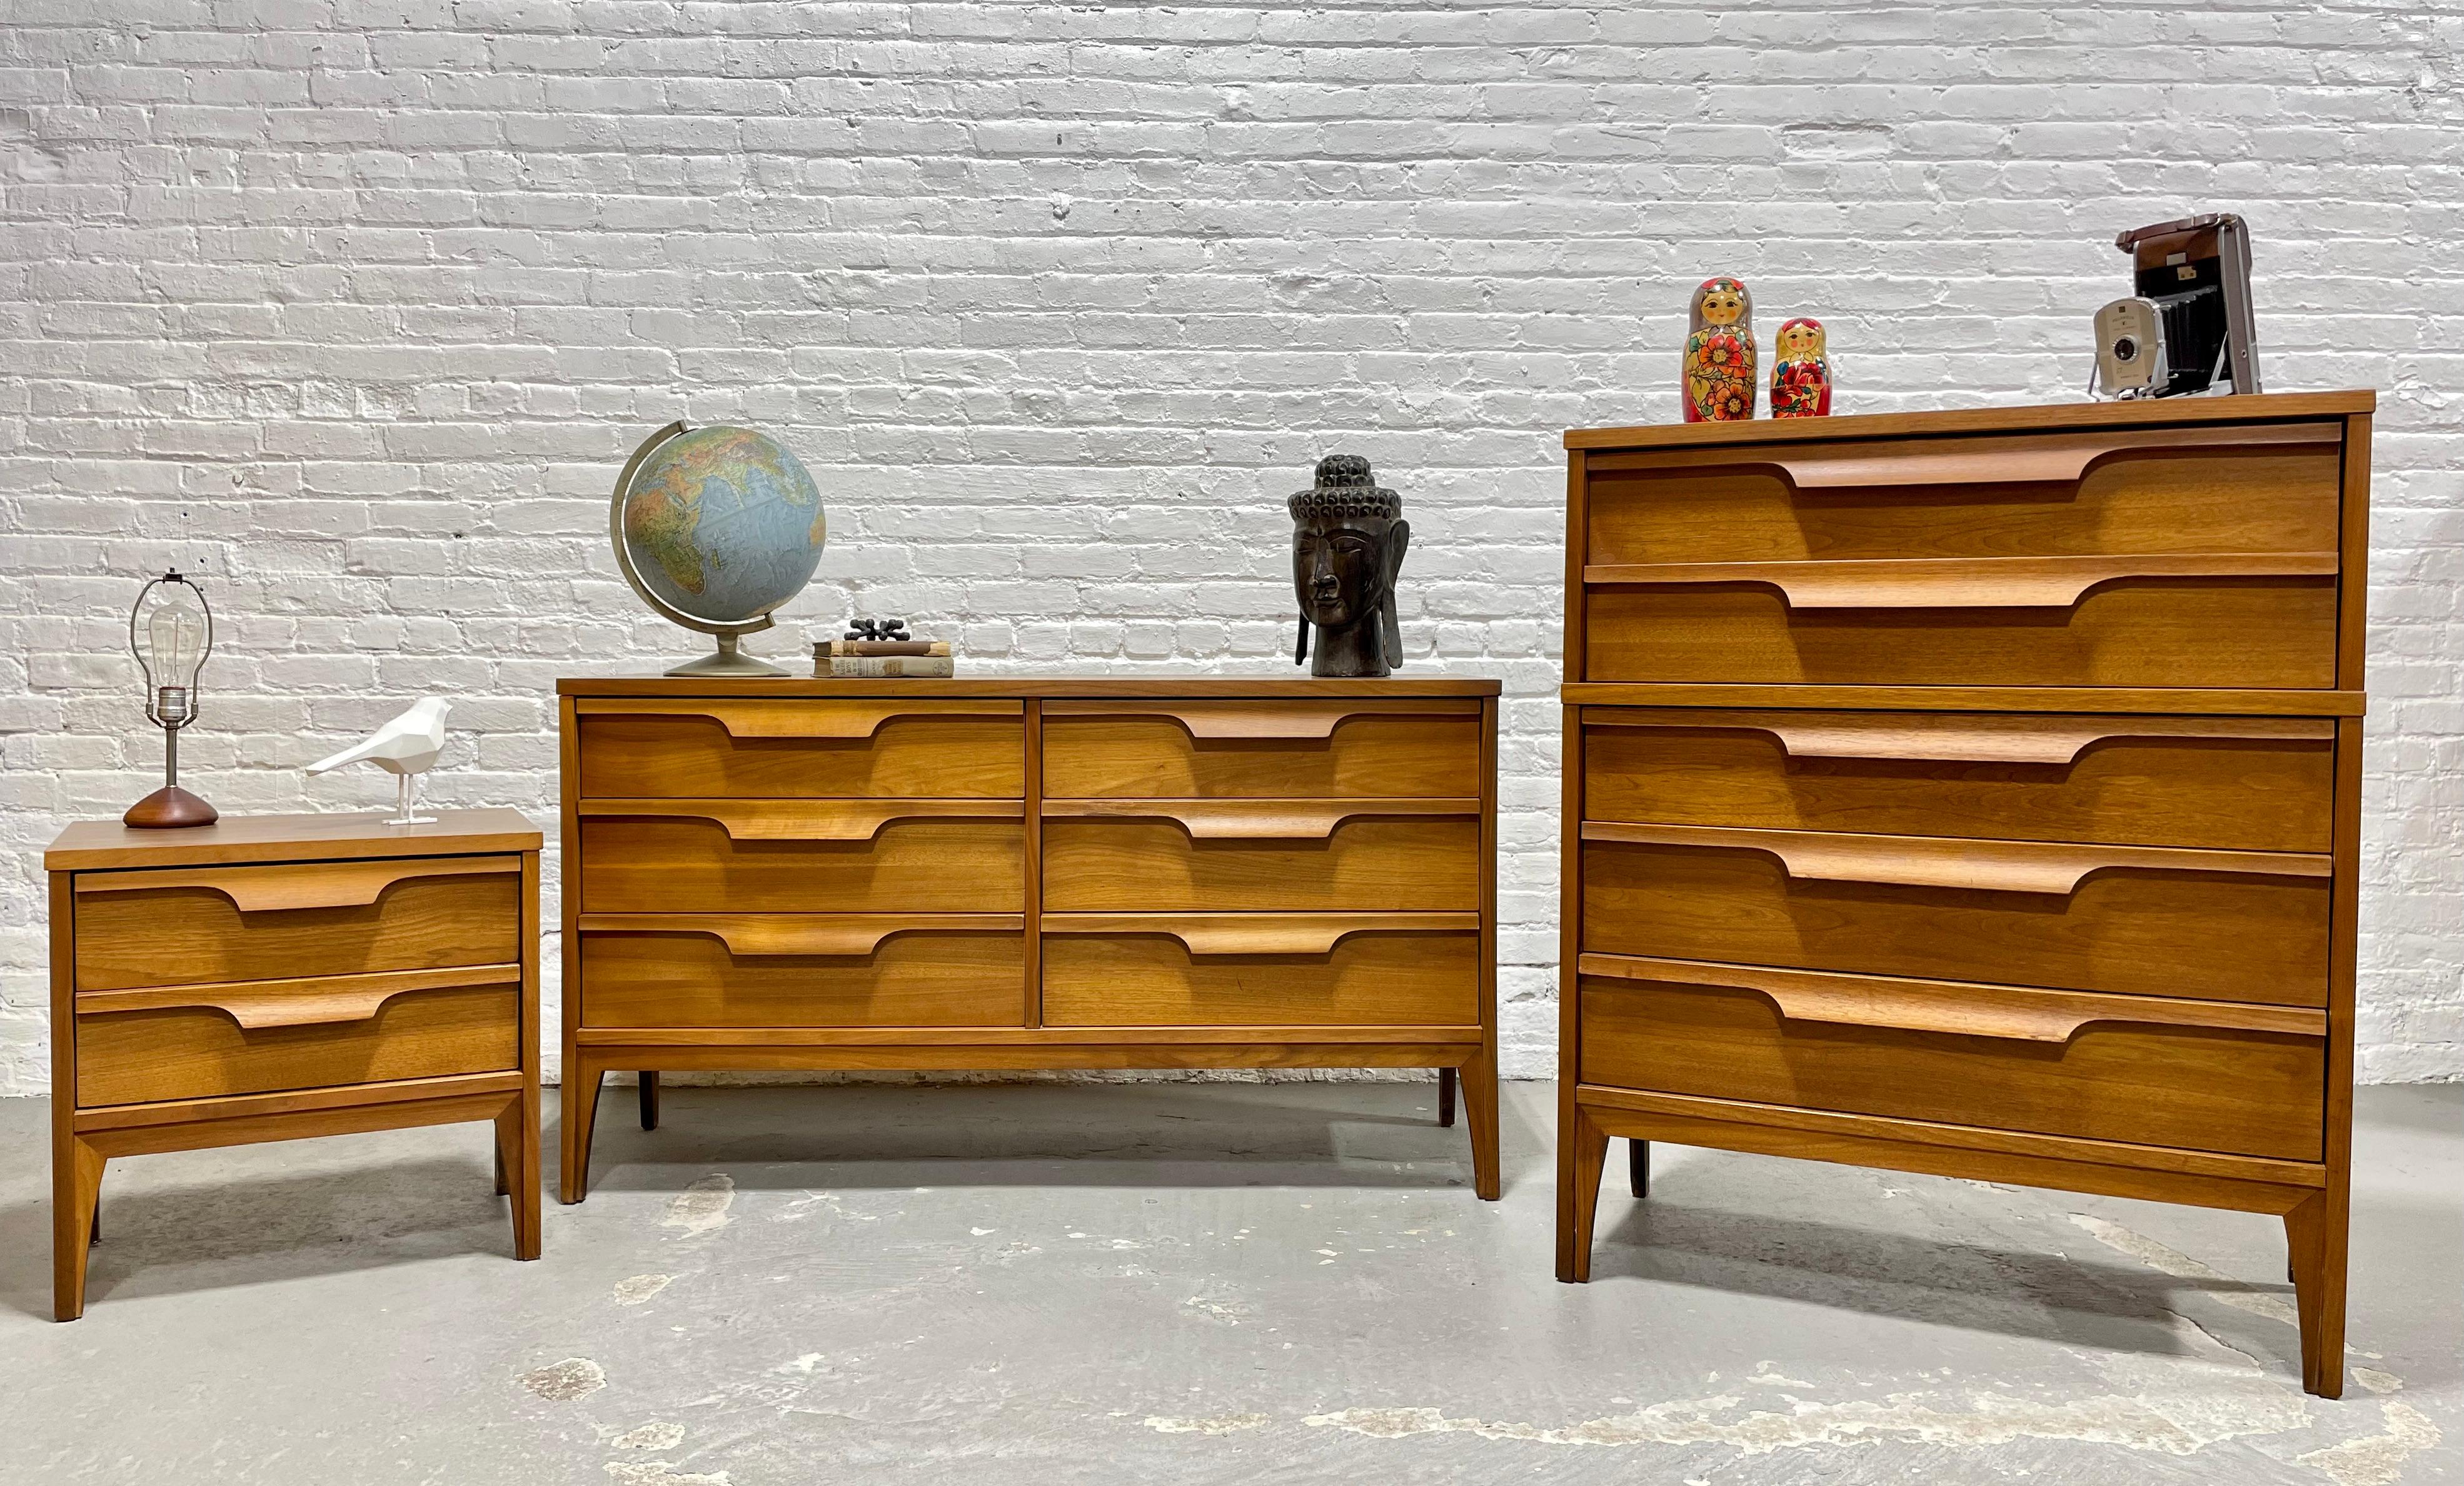 Mid Century Modern Sculpted Bedroom Set by Johnson Carper., c. 1960's, consisting of Long Dresser, High Dresser and Nightstand.  Each piece features beautiful architectural detailing with sculpted drawers with plenty of drawer space. Laminated